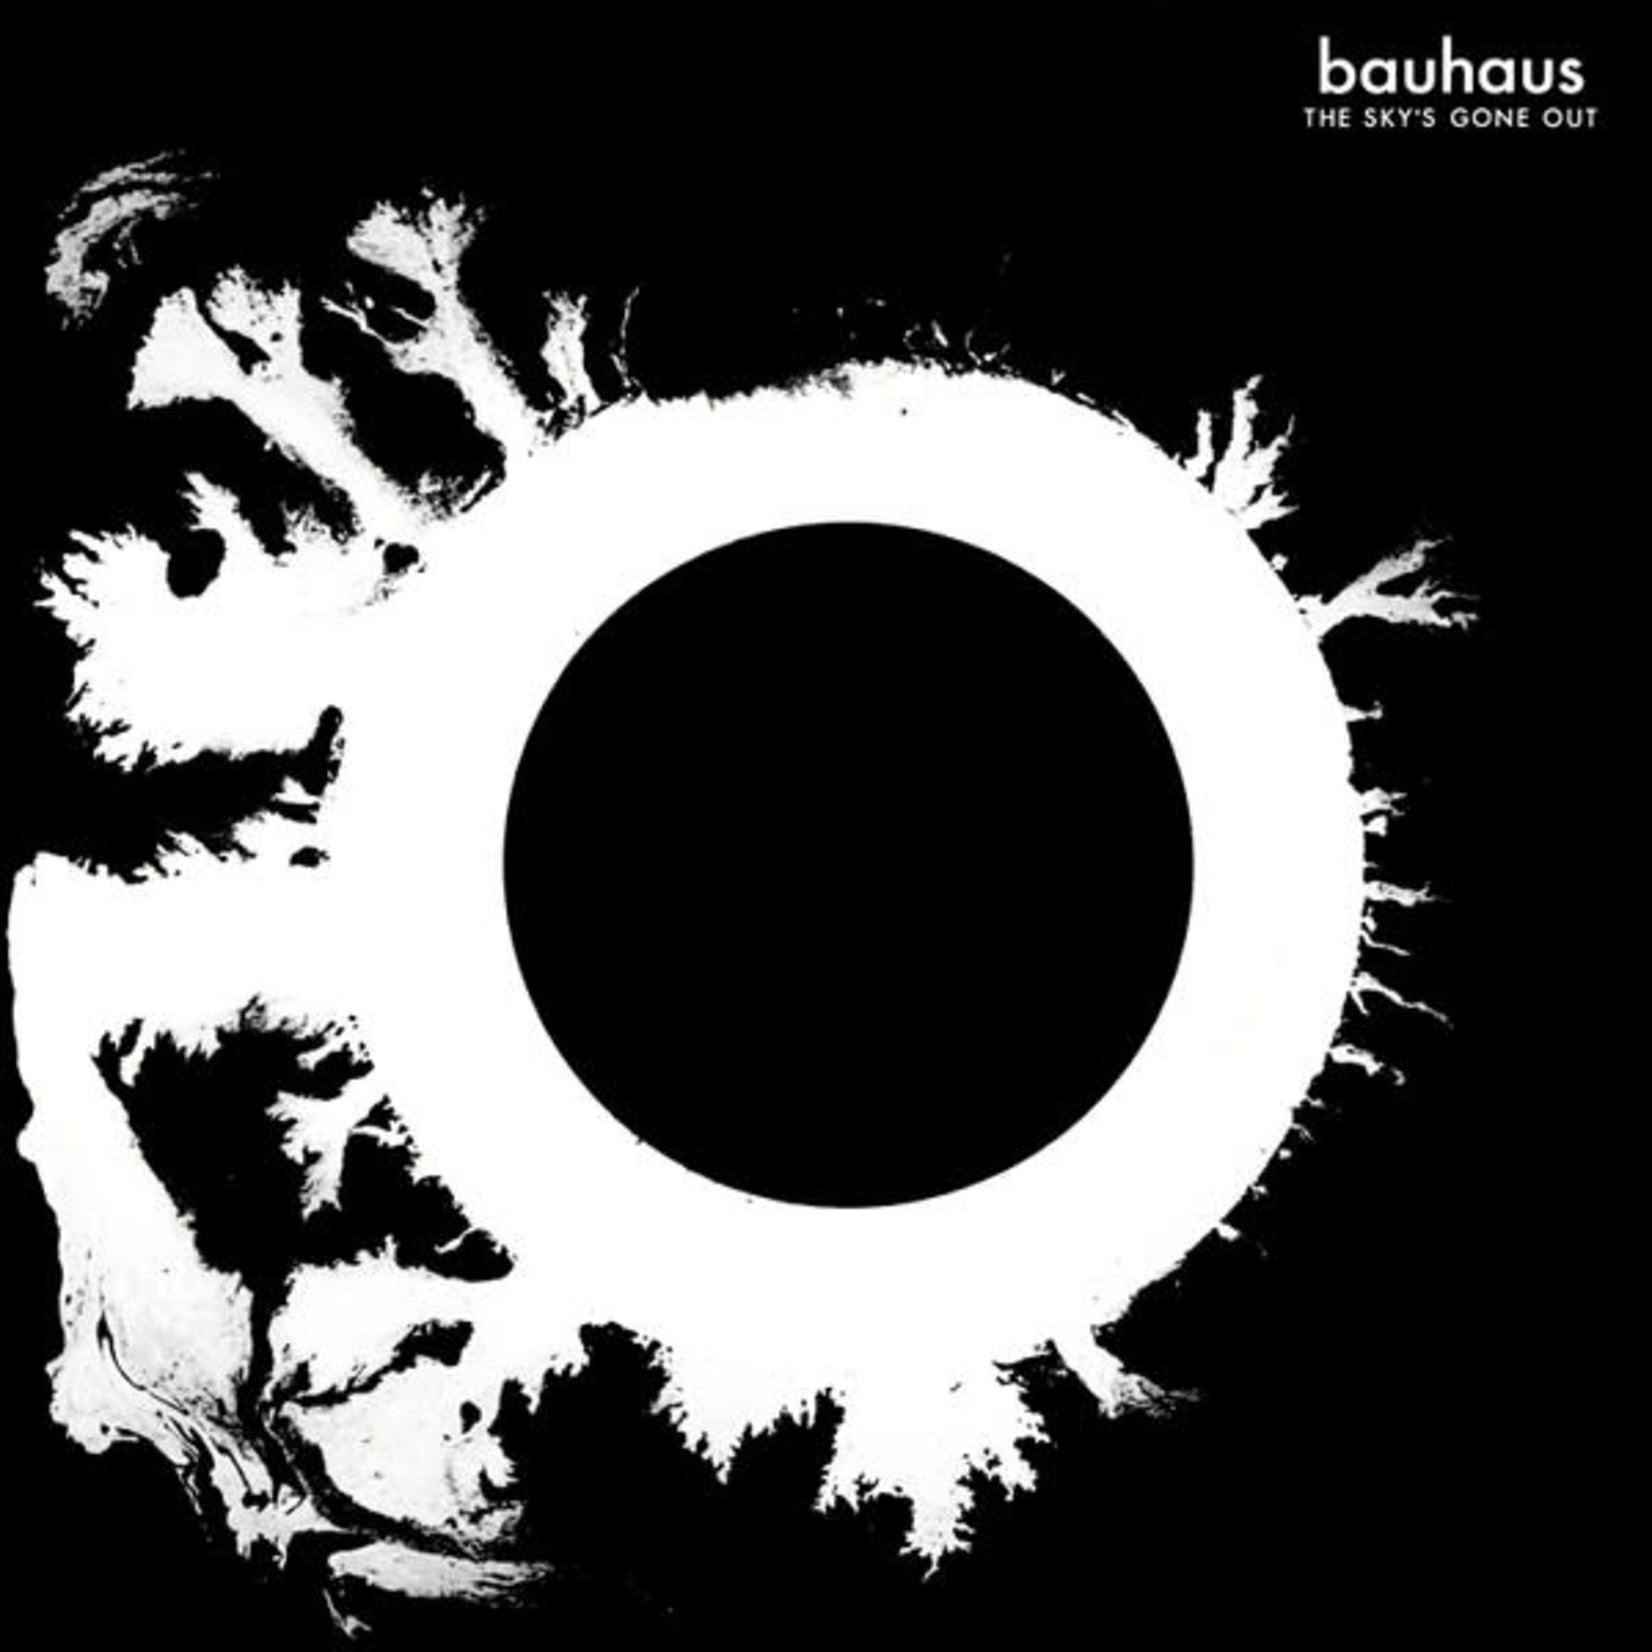 Beggars Banquet Bauhaus - The Sky's Gone Out (LP) [Arkive]